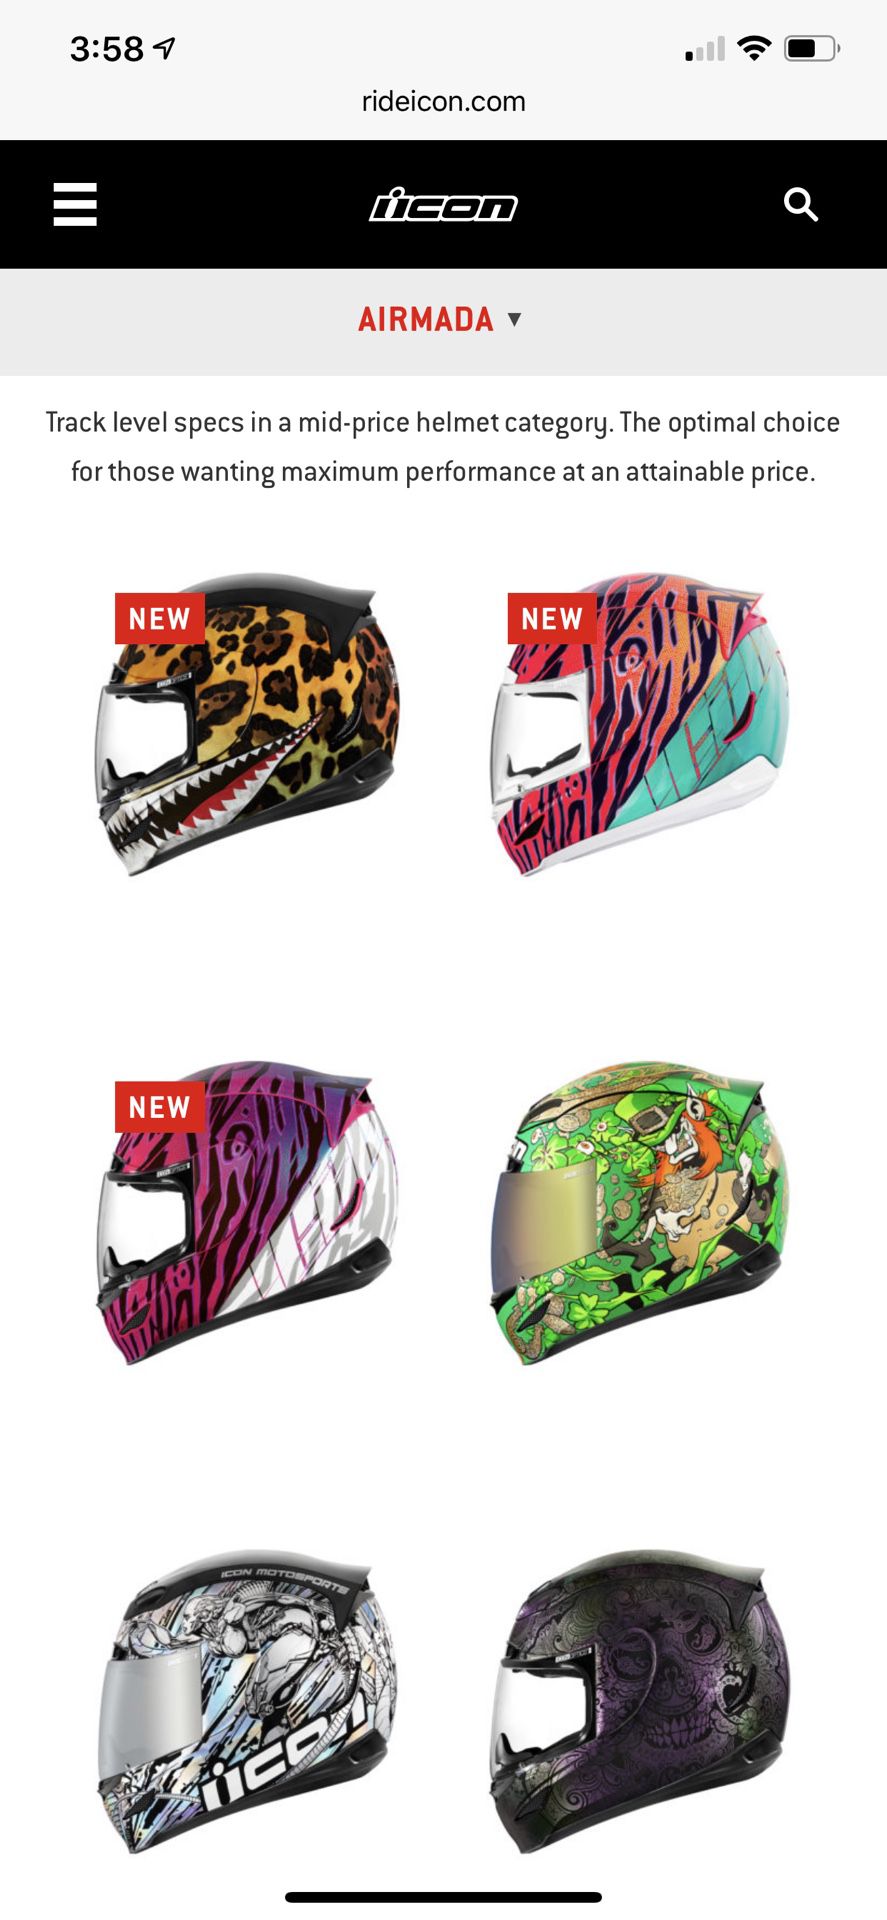 All Icon motorcycle helmets $109-509 depending on model